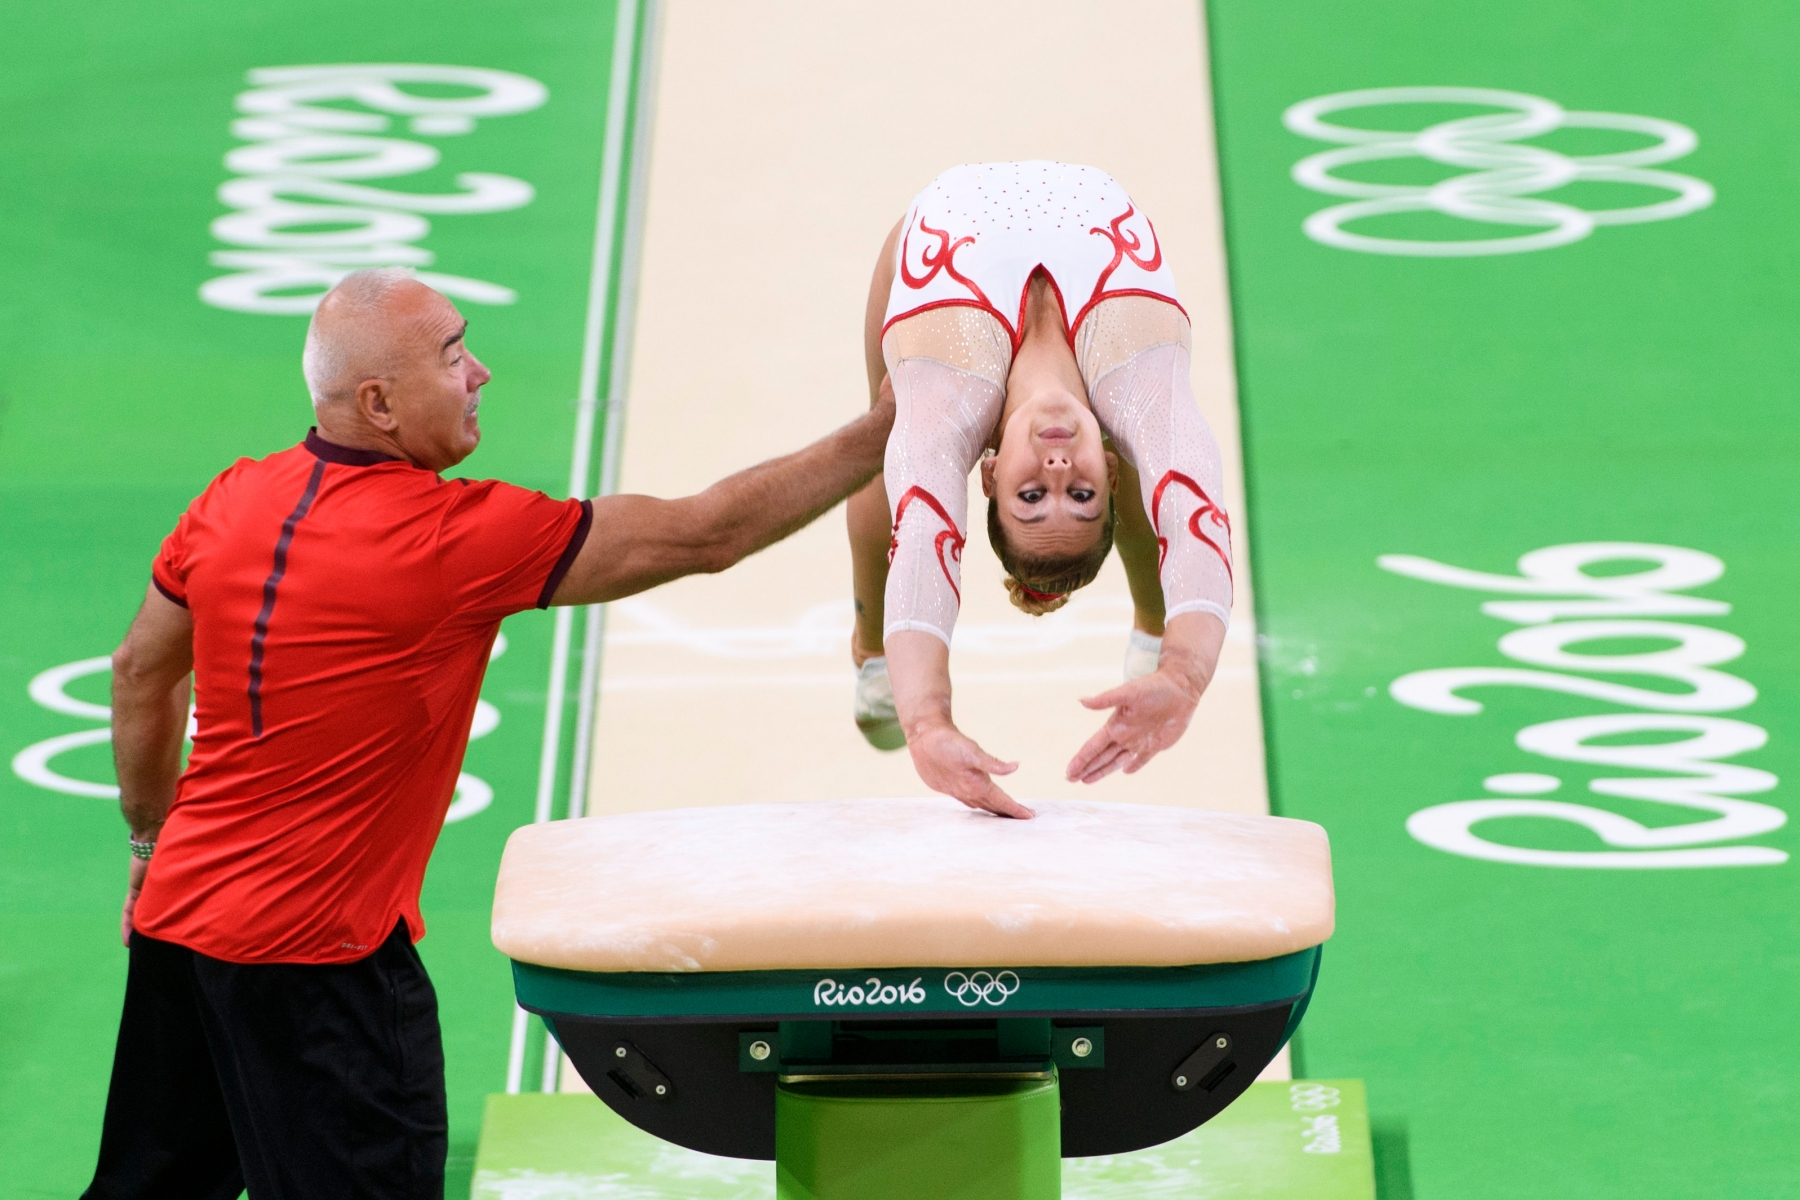 Switzerland's Giulia Steingruber, right, and her coach Zoltan Jordanov warm up on the vault during the women's Individual All-Around qualification in the Rio Olympic Arena in Rio de Janeiro, Brazil, at the Rio 2016 Olympic Summer Games, pictured on Sunday, August 07, 2016. (KEYSTONE/Laurent Gillieron)gym BRAZIL RIO OLYMPICS 2016 WOMEN'S ARTISTIC GYMNASTICS